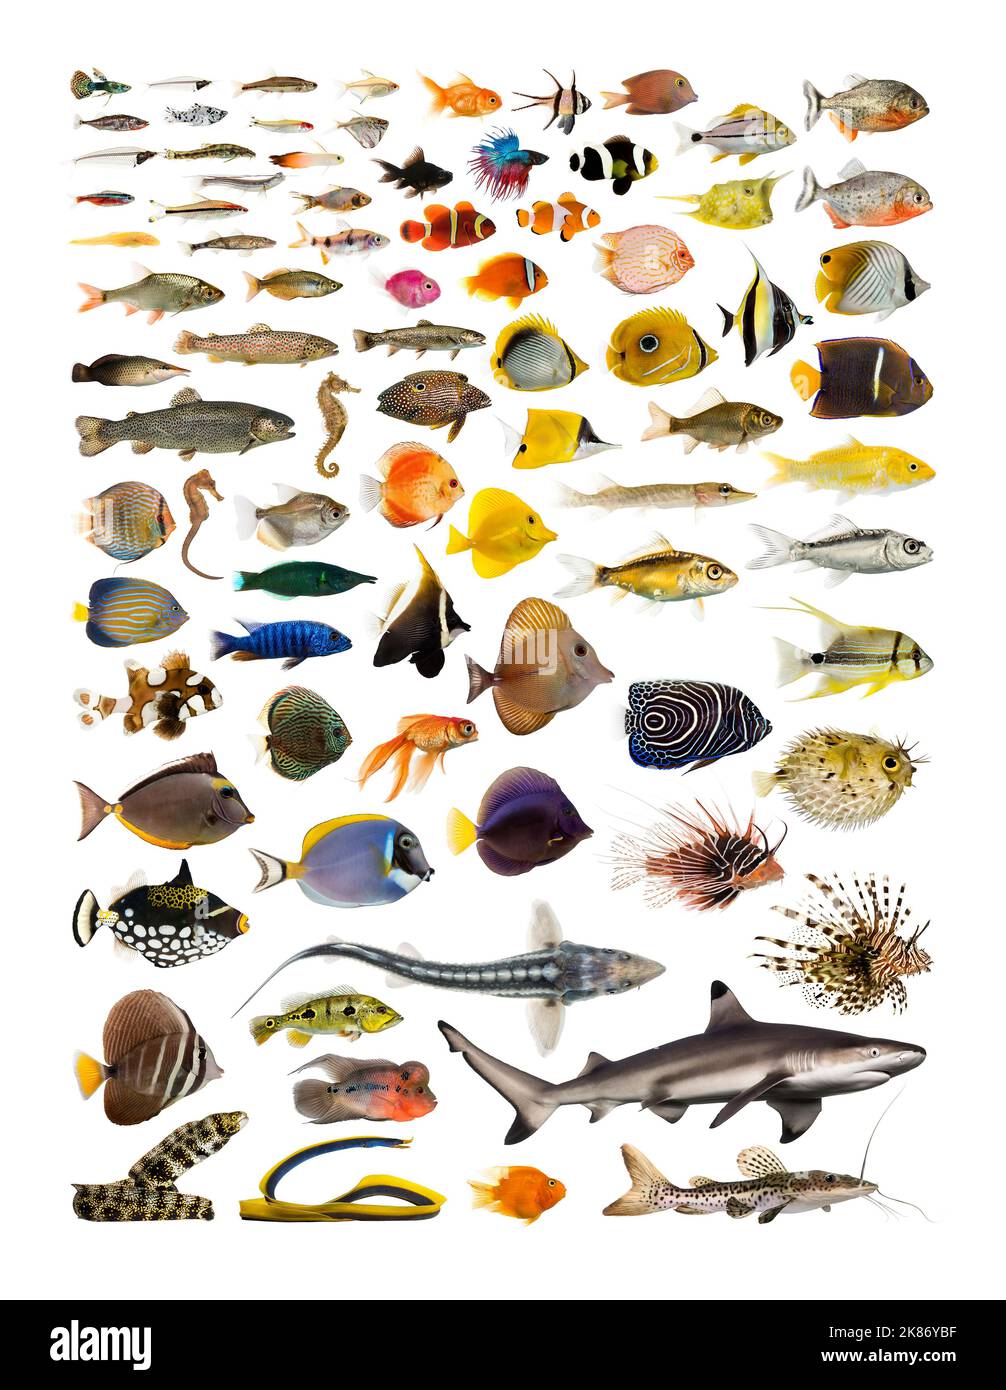 Variety of fish swimming Cut Out Stock Images & Pictures - Alamy